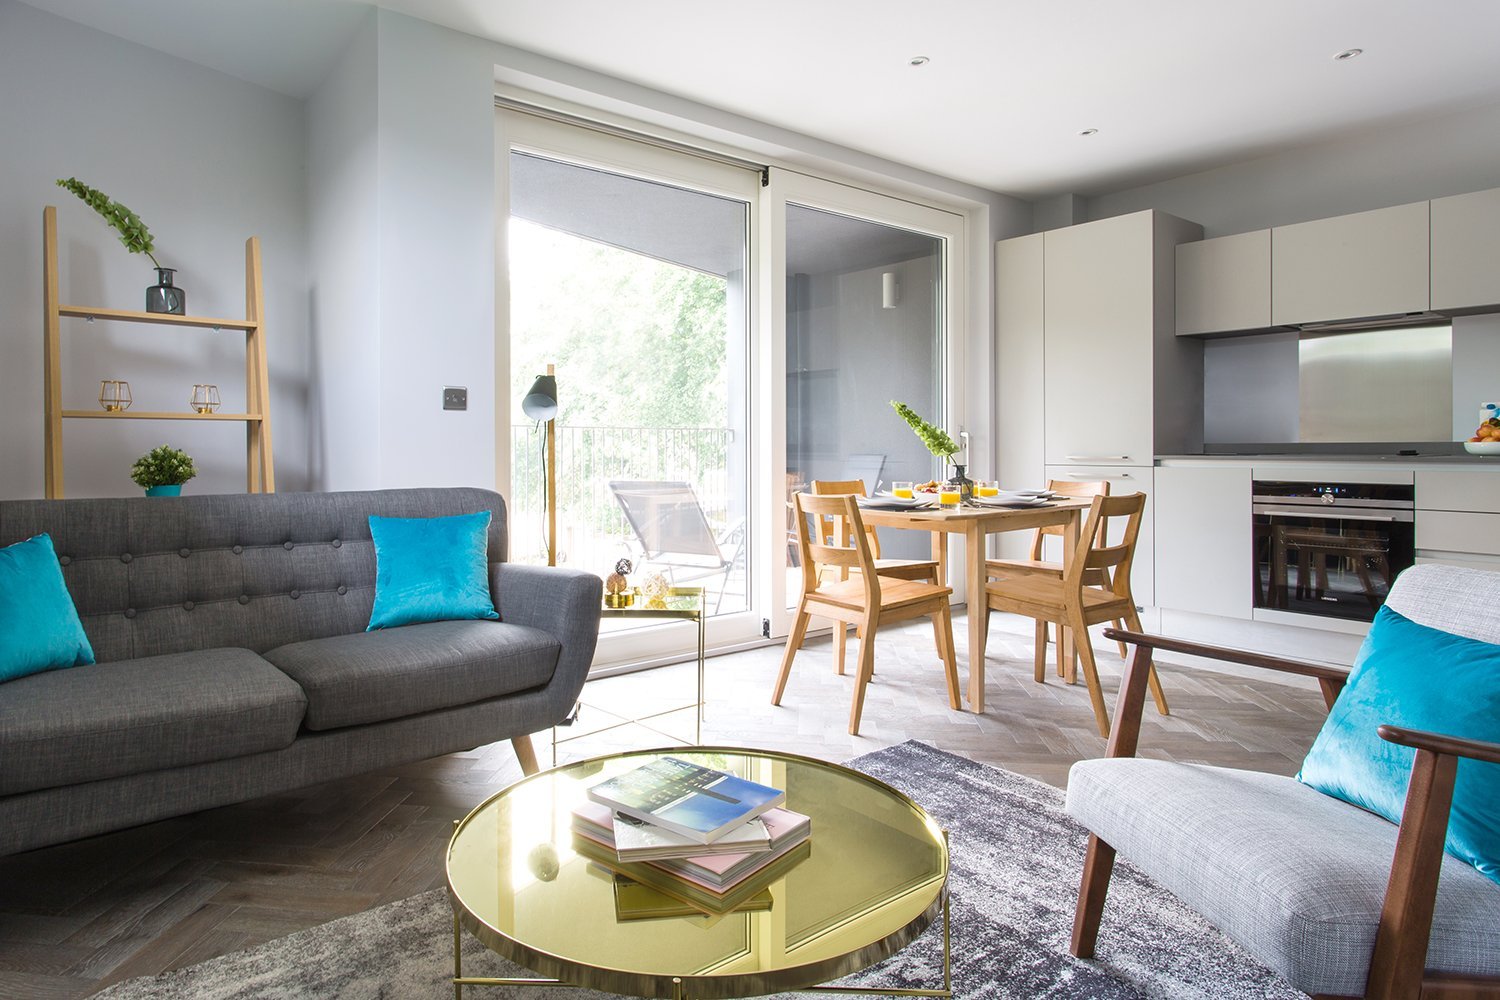 Farnborough-Serviced-Accommodation-|-Hampshire-Serviced-Apartments-|-Serviced-Apartments-Near-Farnborough-Airport-|-BEST-RATES--Free-Wifi-&-Parking-BOOK-NOW-|-Urban-Stay